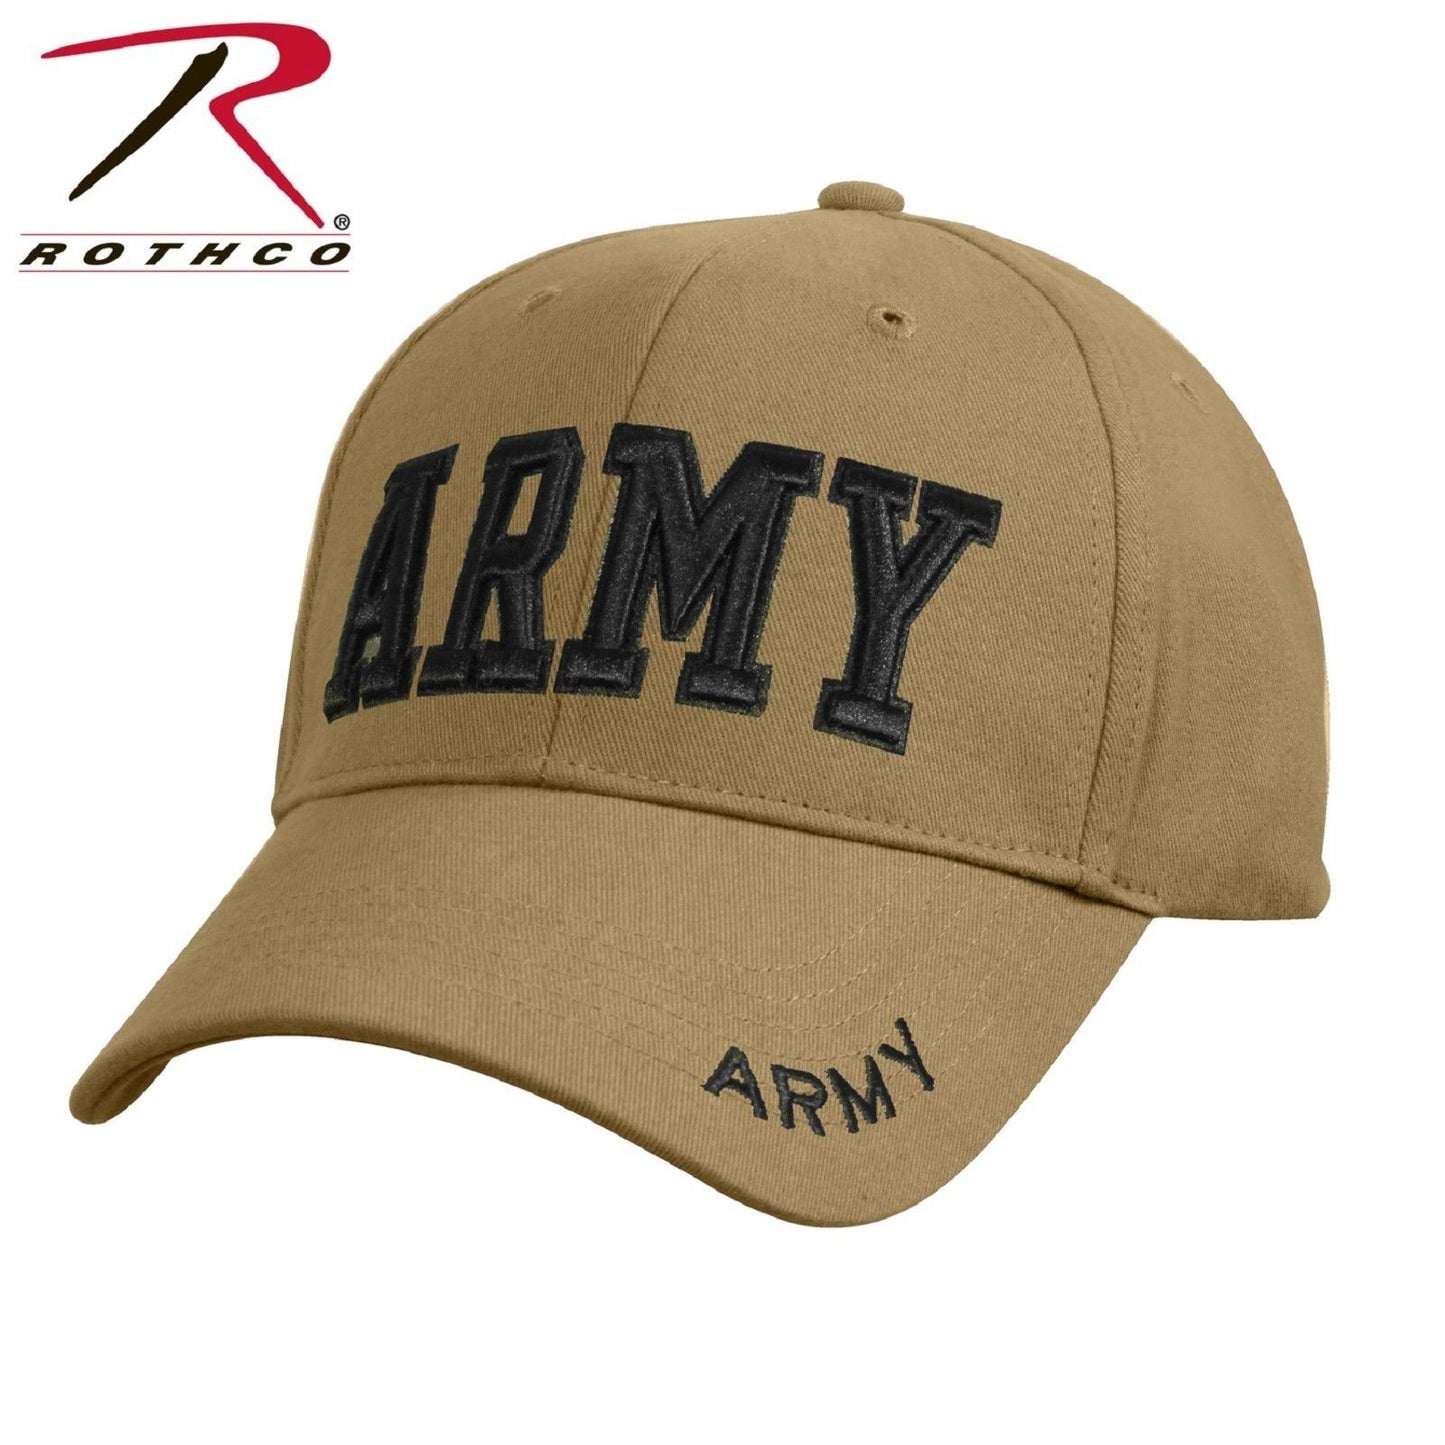 Coyote Brown Deluxe Low Profile Adjustable ARMY Baseball Cap Strapback Hat